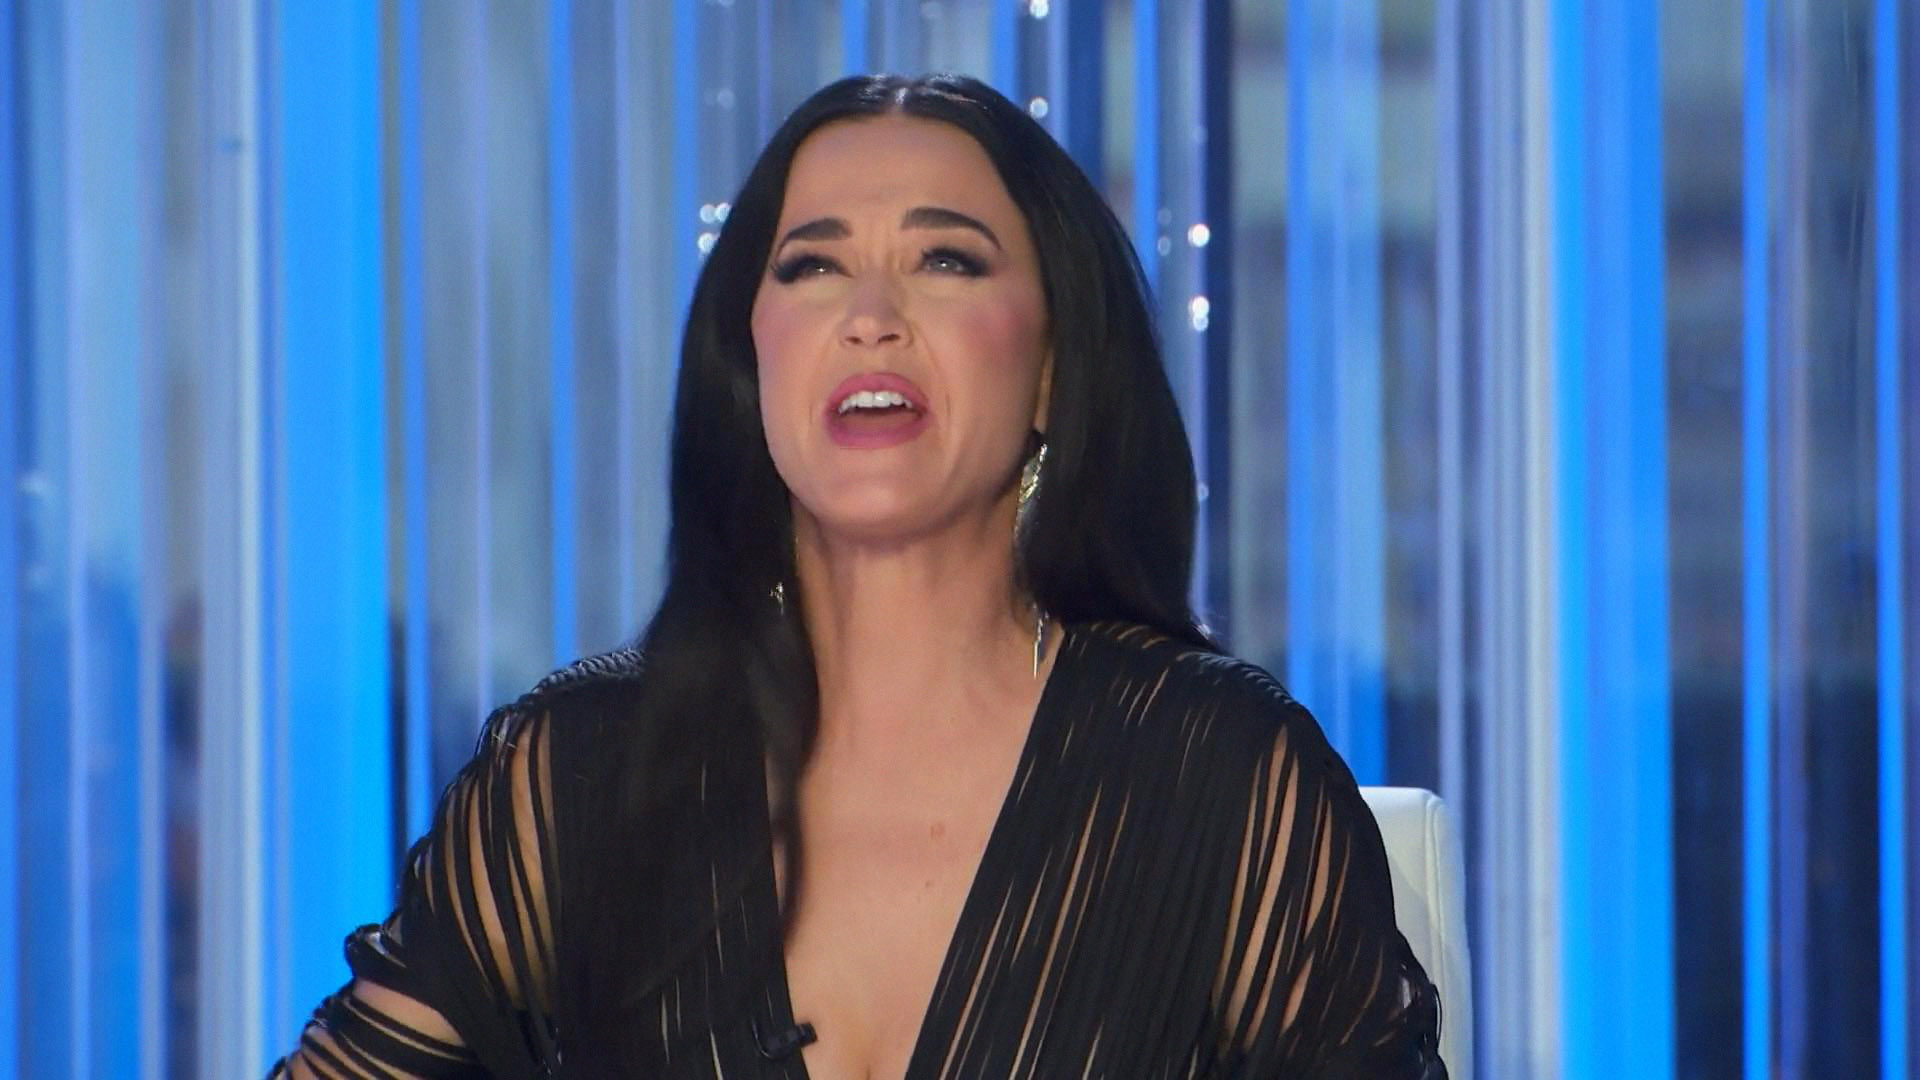 Does Katy Perry Really Plan to Quit American Idol Over Fan Backlash?